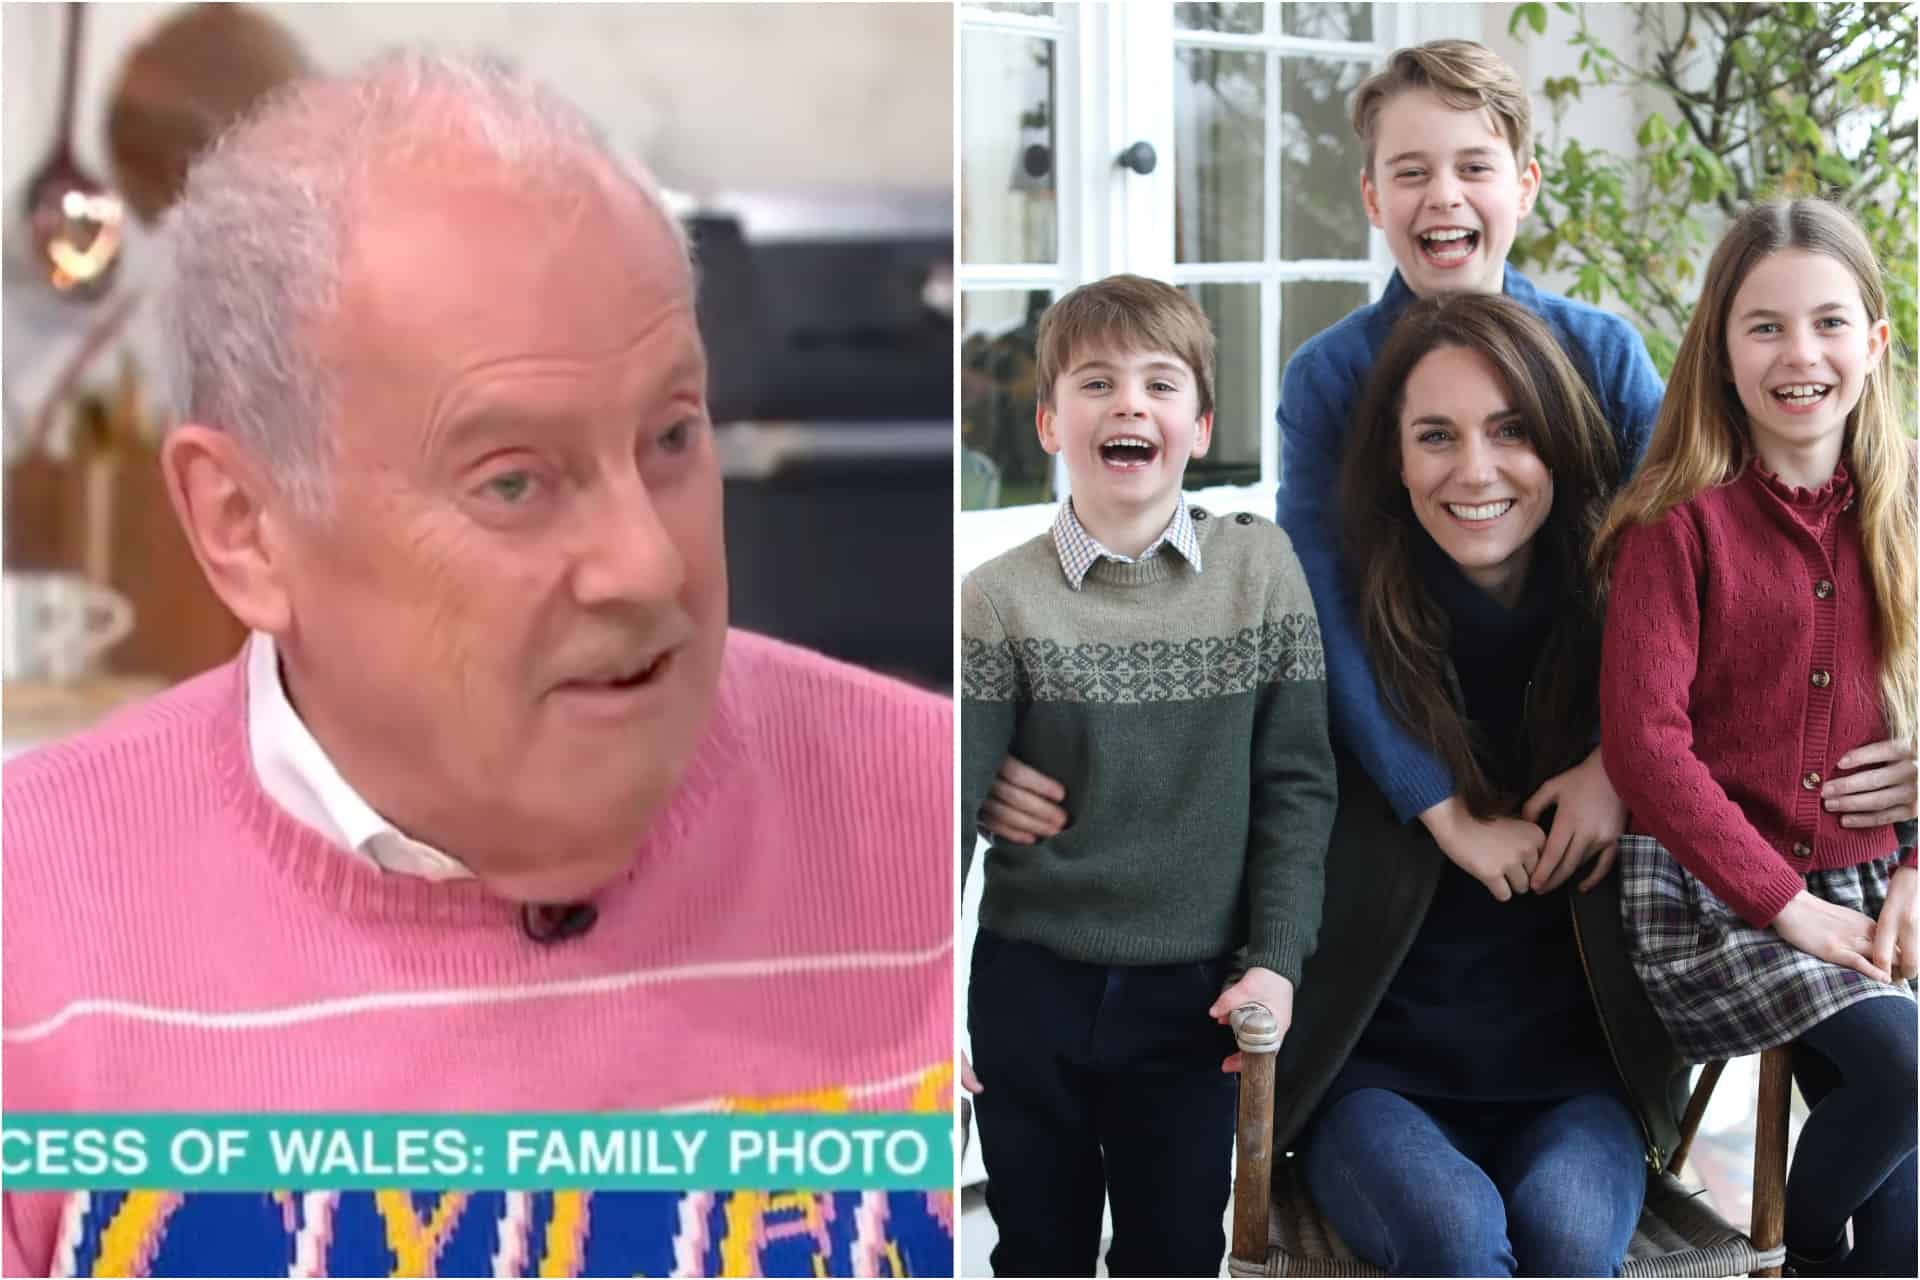 Gyles Brandreth stitched up in the best way possible during Kate Middleton saga